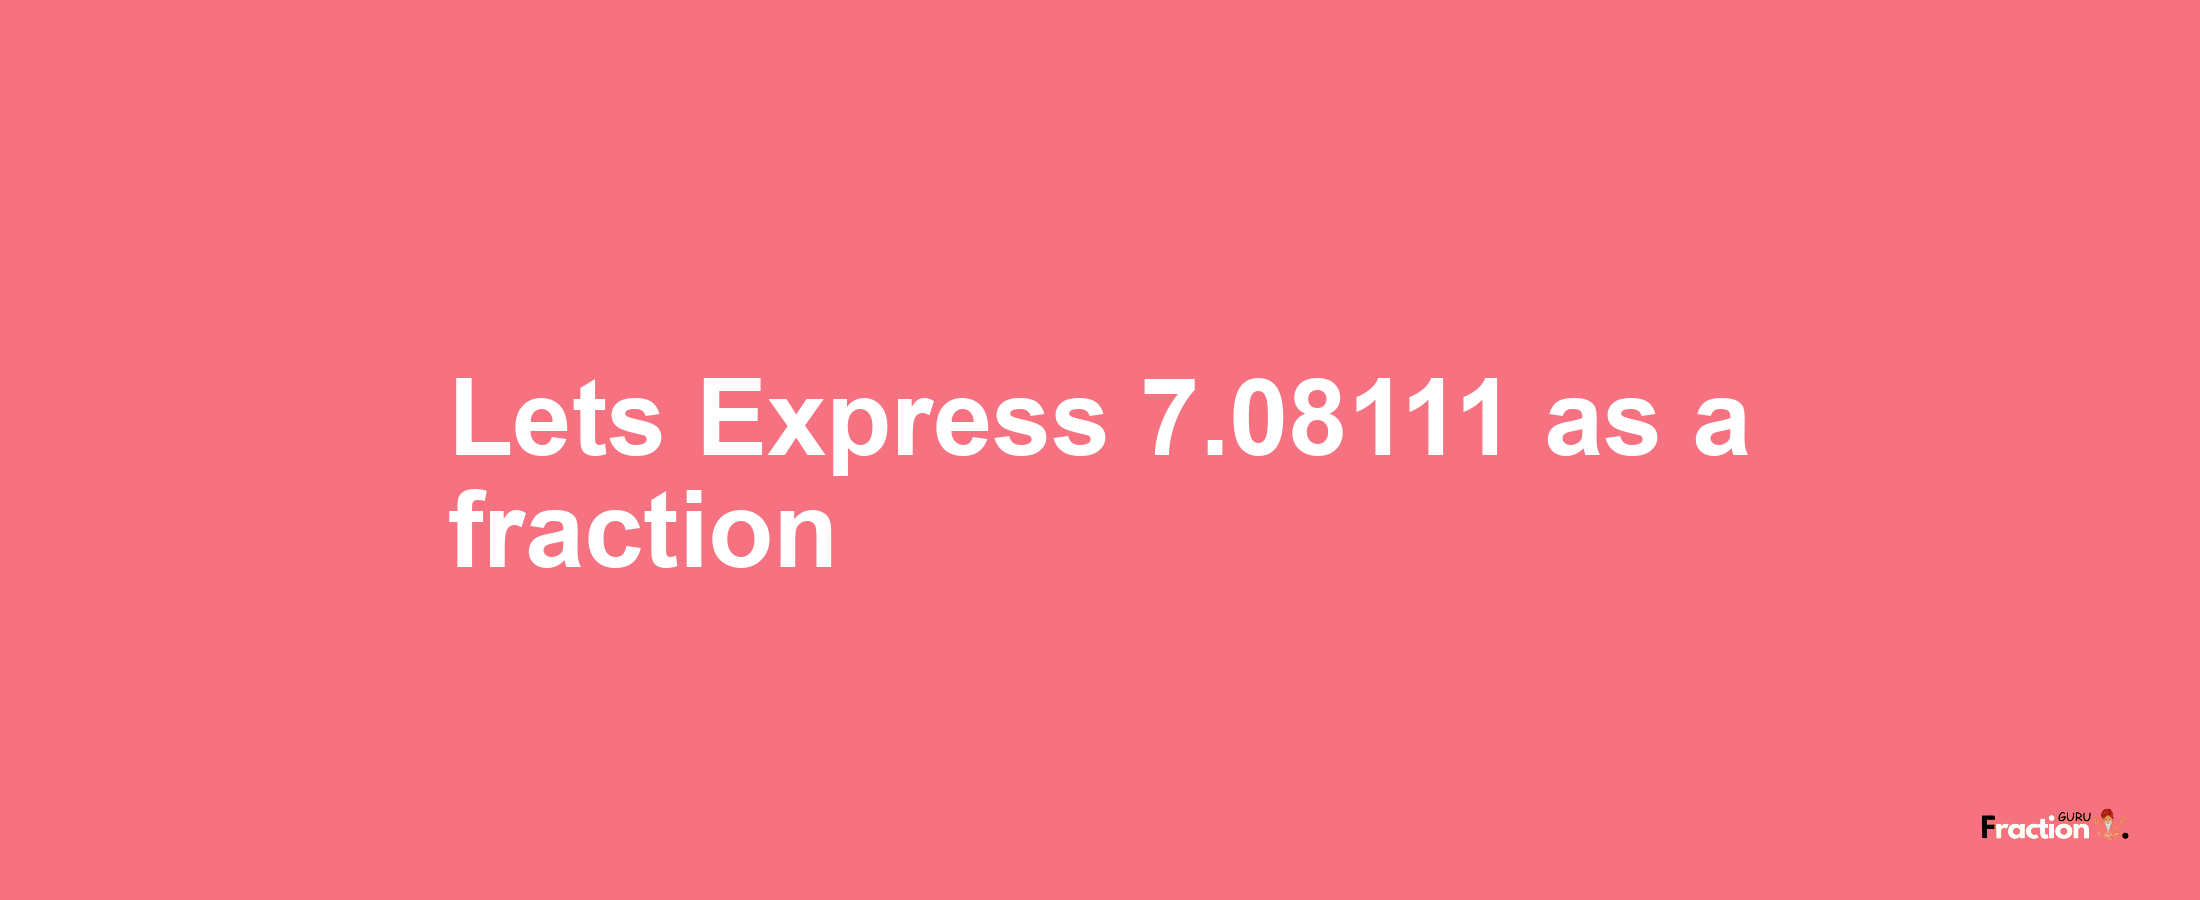 Lets Express 7.08111 as afraction